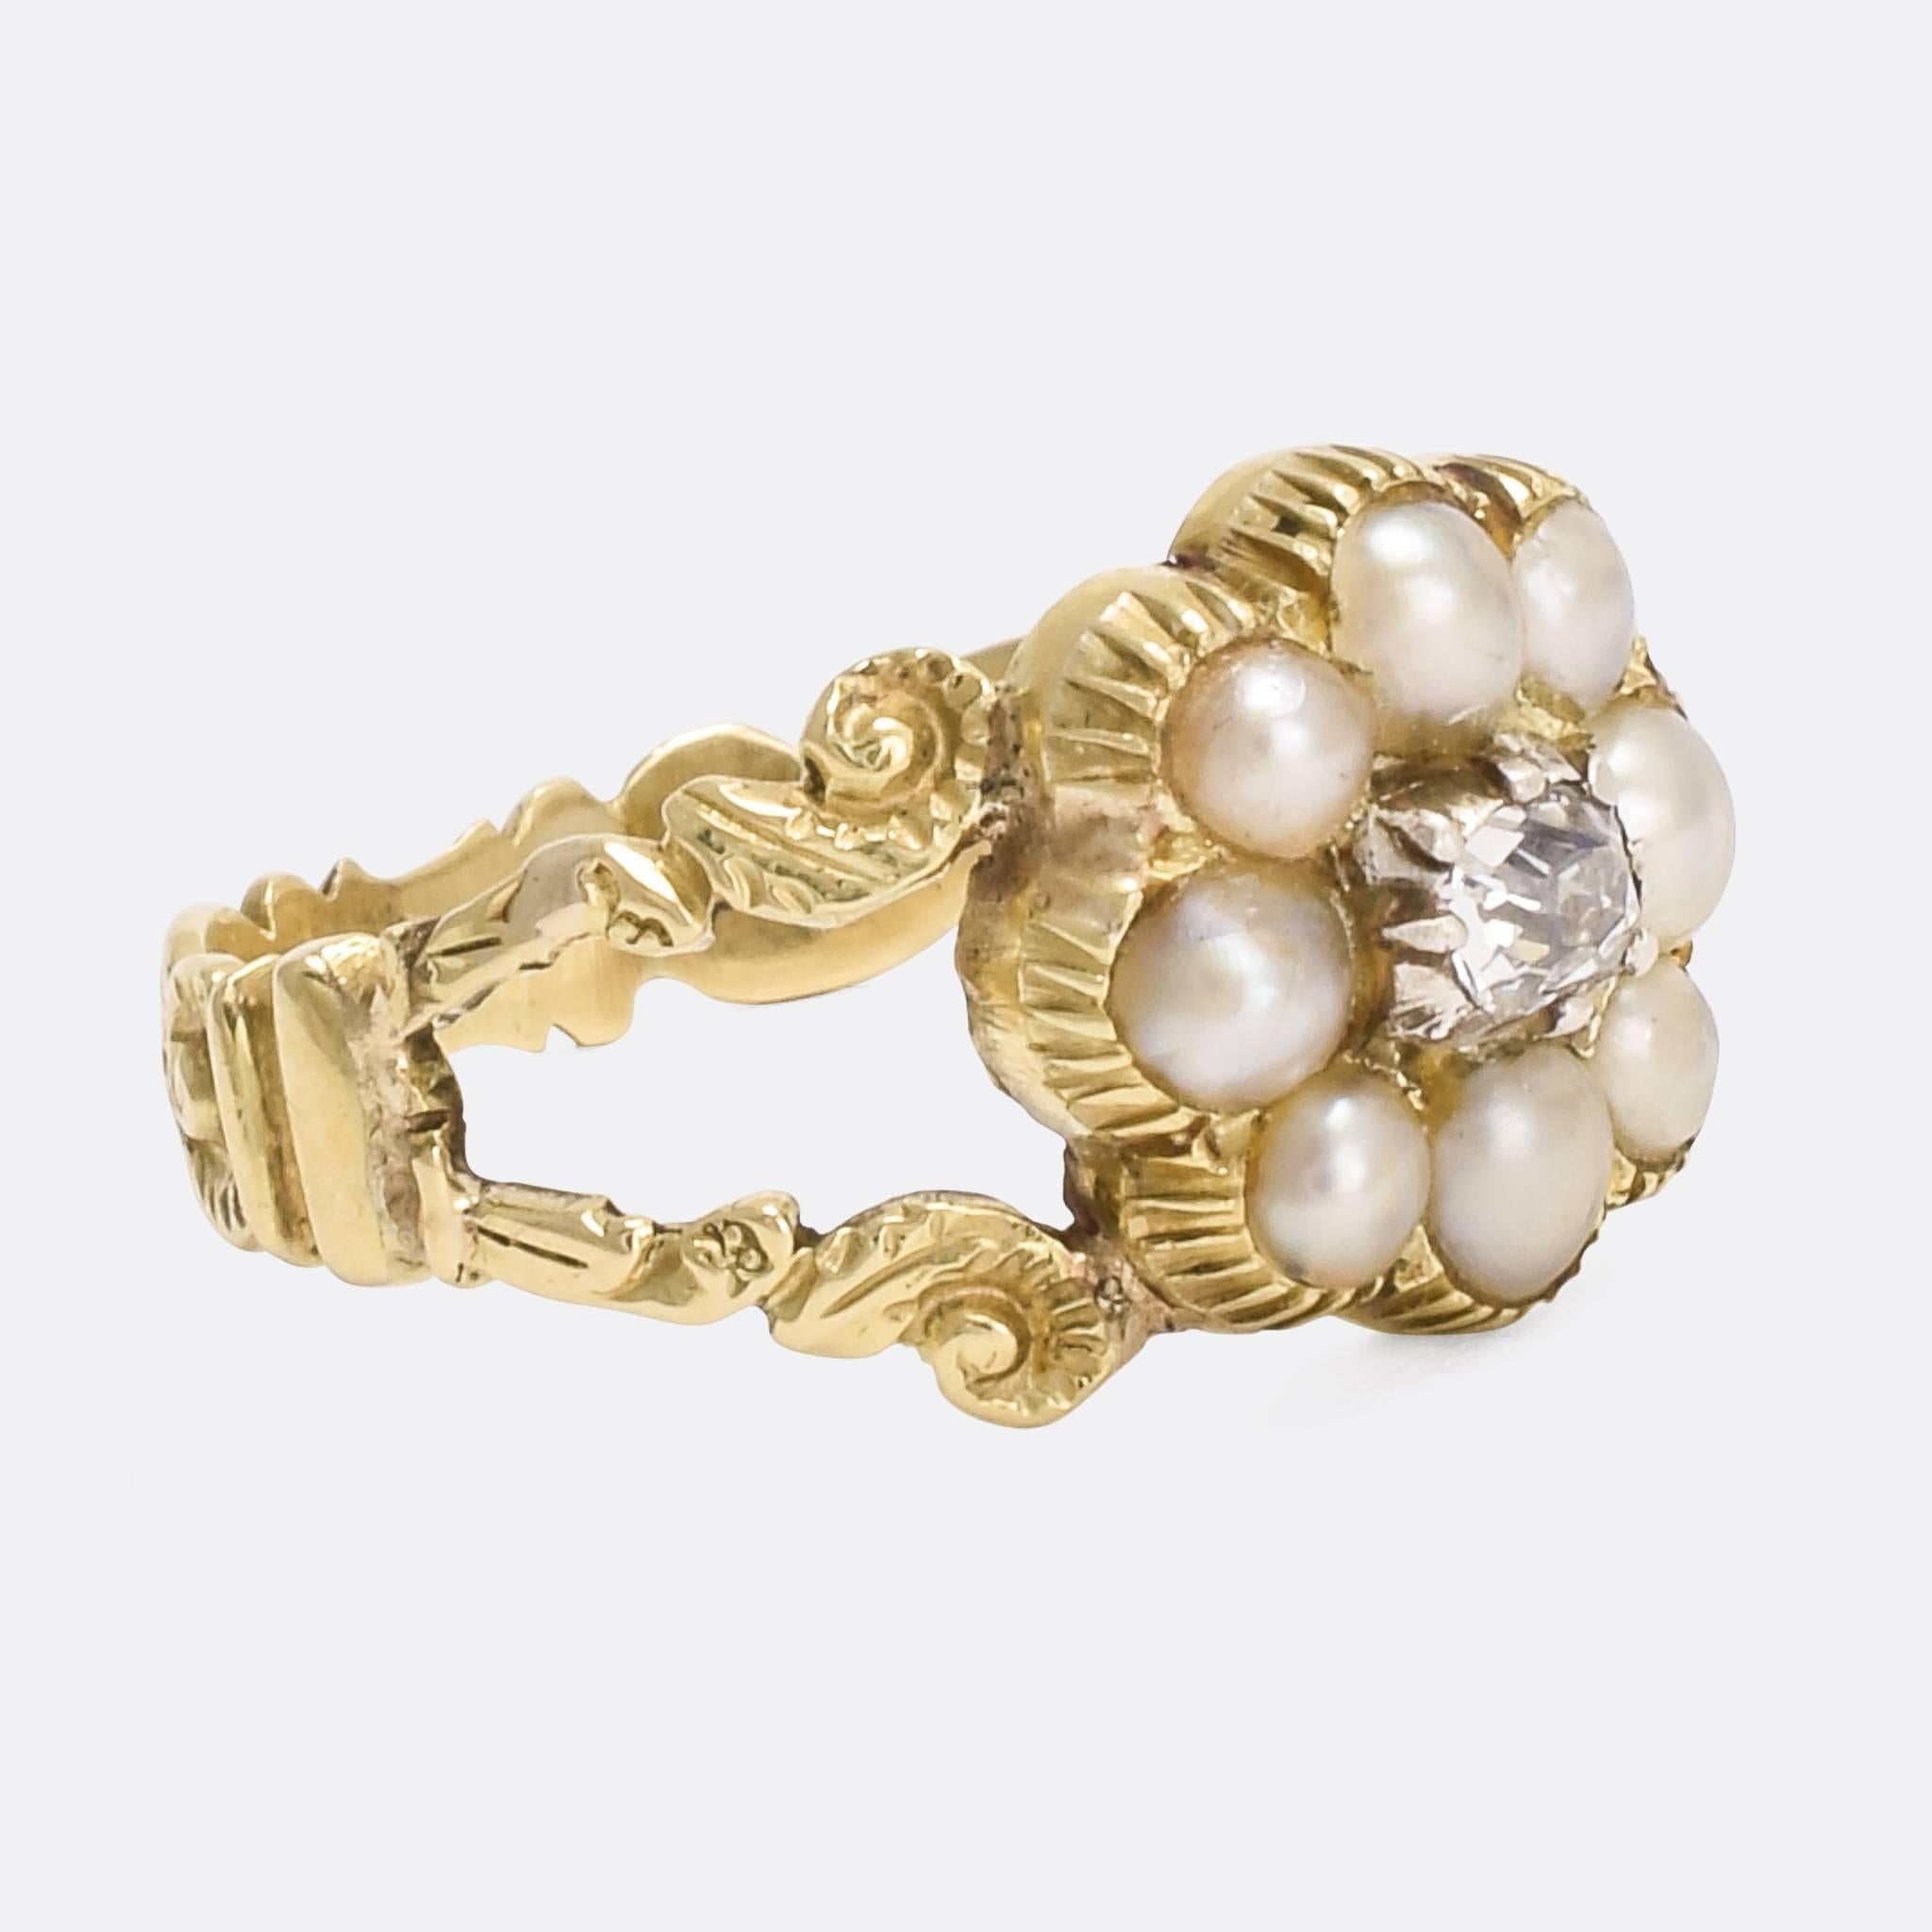 A beautiful antique cluster ring set with white pearls and an old mine cut diamonds. It's modelled in 15 karat gold throughout and was made in England circa 1820. With elegant split shoulders and hand-chased foliate band.

STONES 
Natural Pearls and